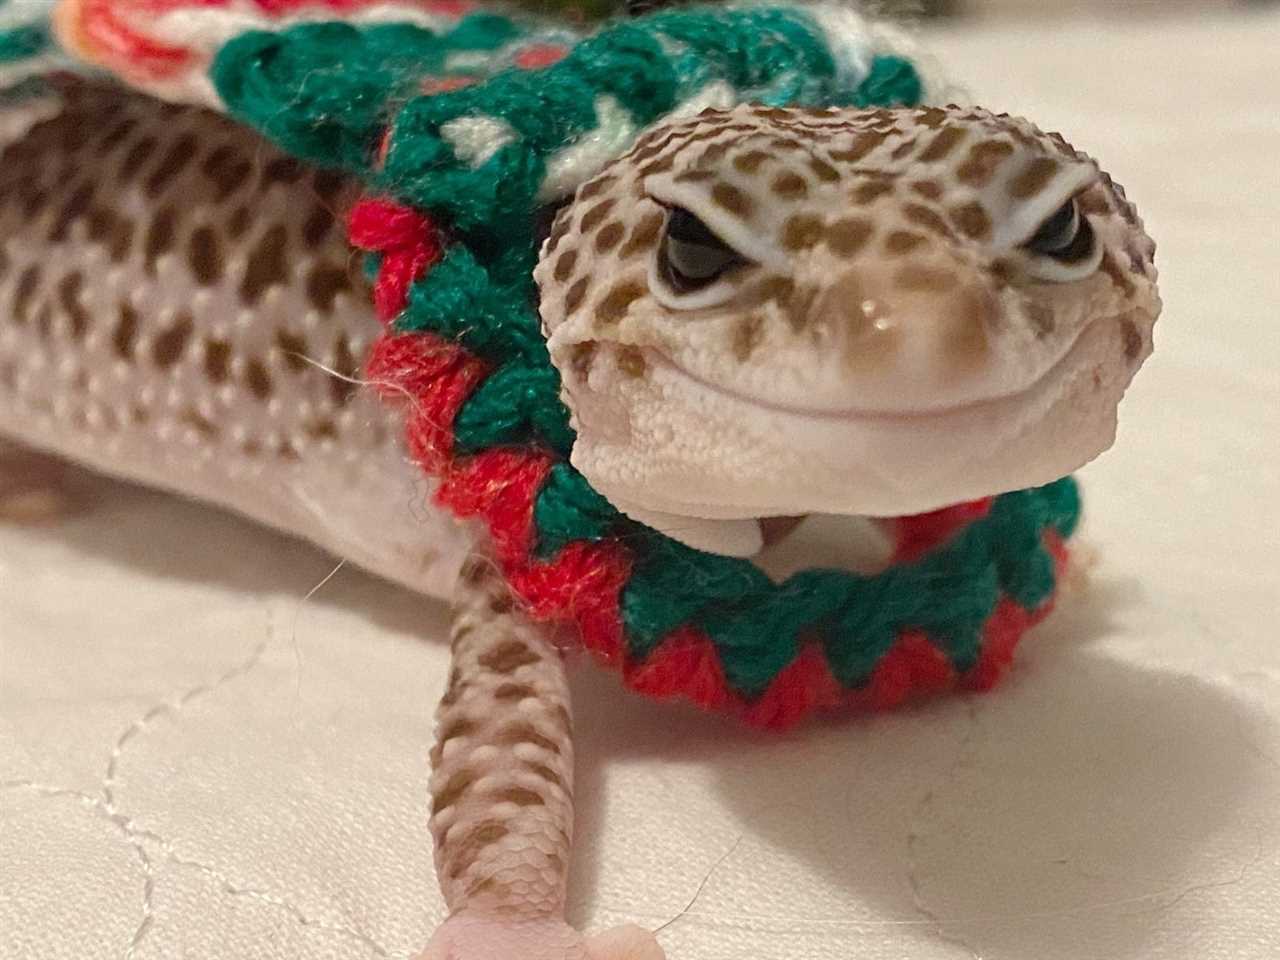 Show Off Your Gecko's Style with Unique Outfits